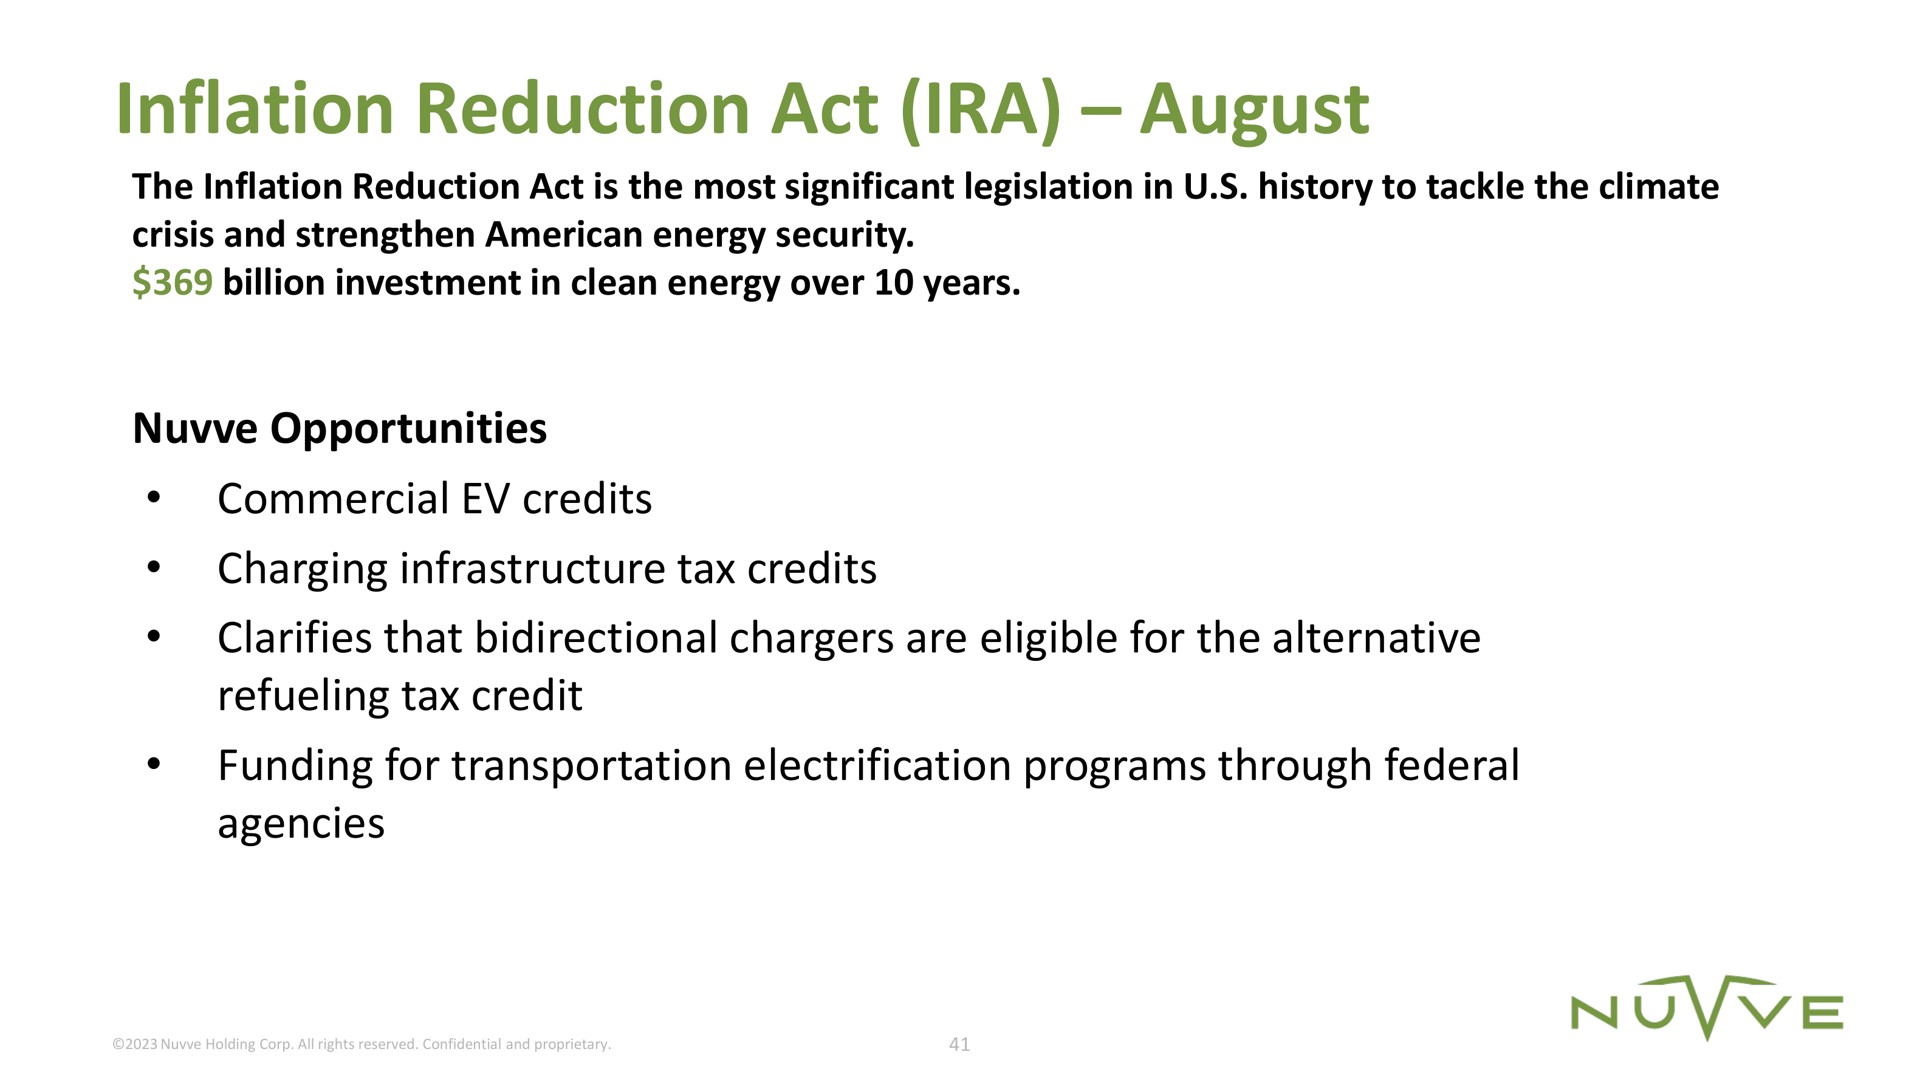 inflation reduction act august charging infrastructure tax credits clarifies that bidirectional chargers are eligible for the alternative refueling tax credit funding for transportation electrification programs through federal | Nuvve